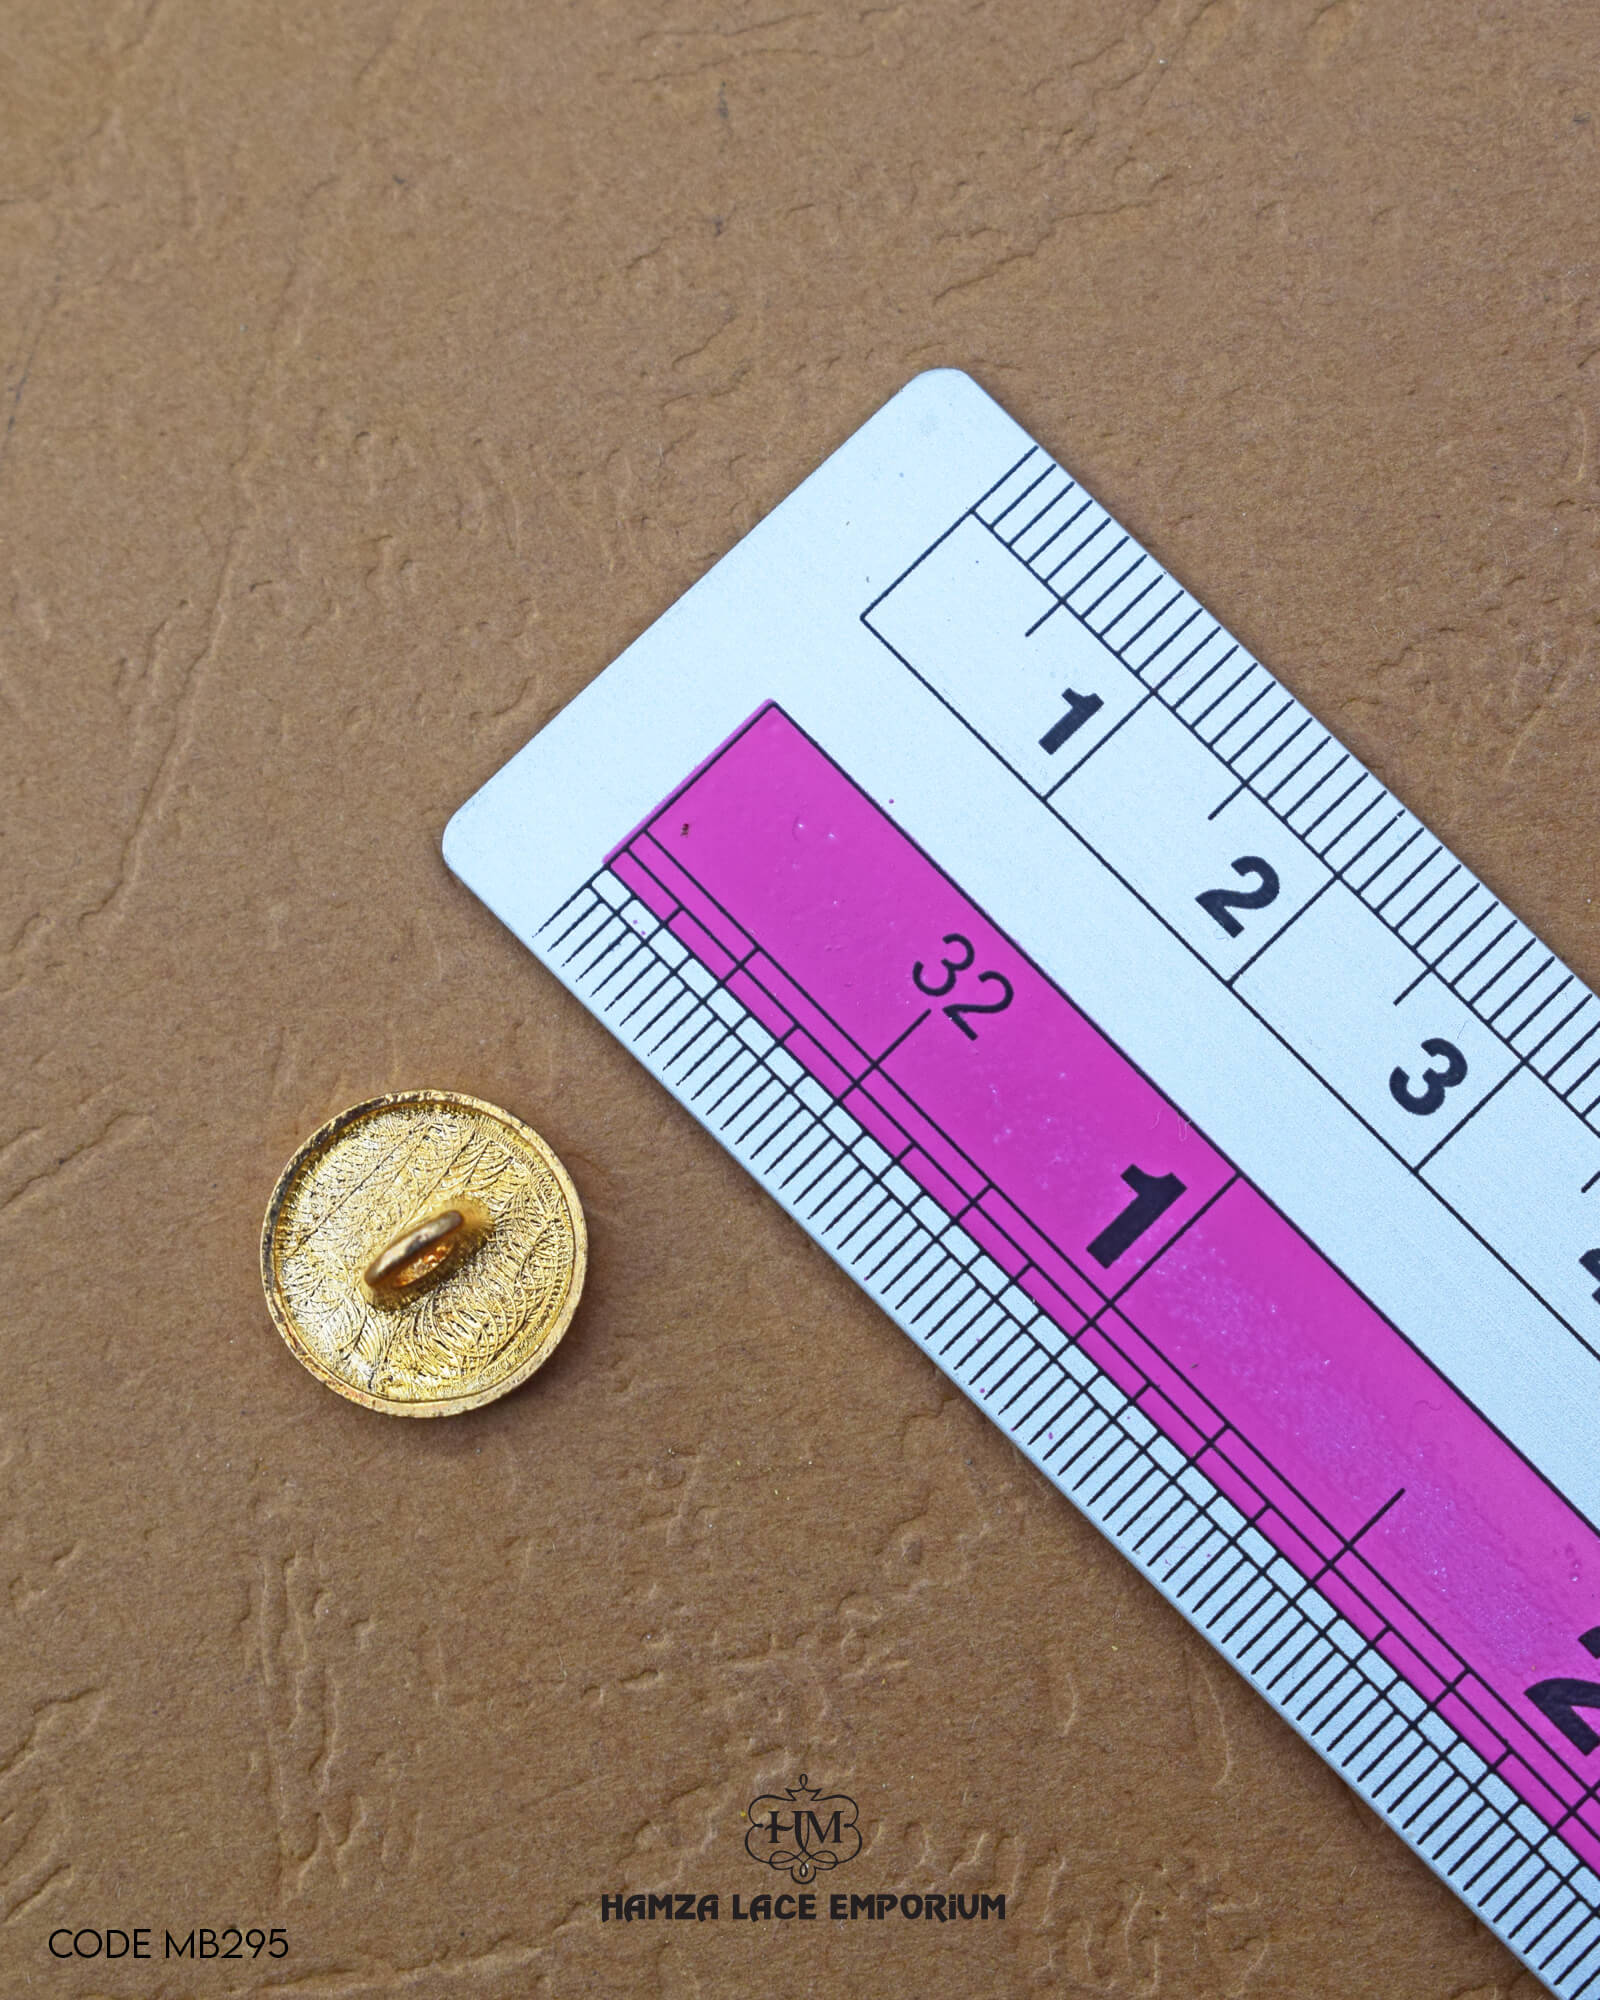 Size of the 'Golden Metal Button MB373' is given with the help of a ruler